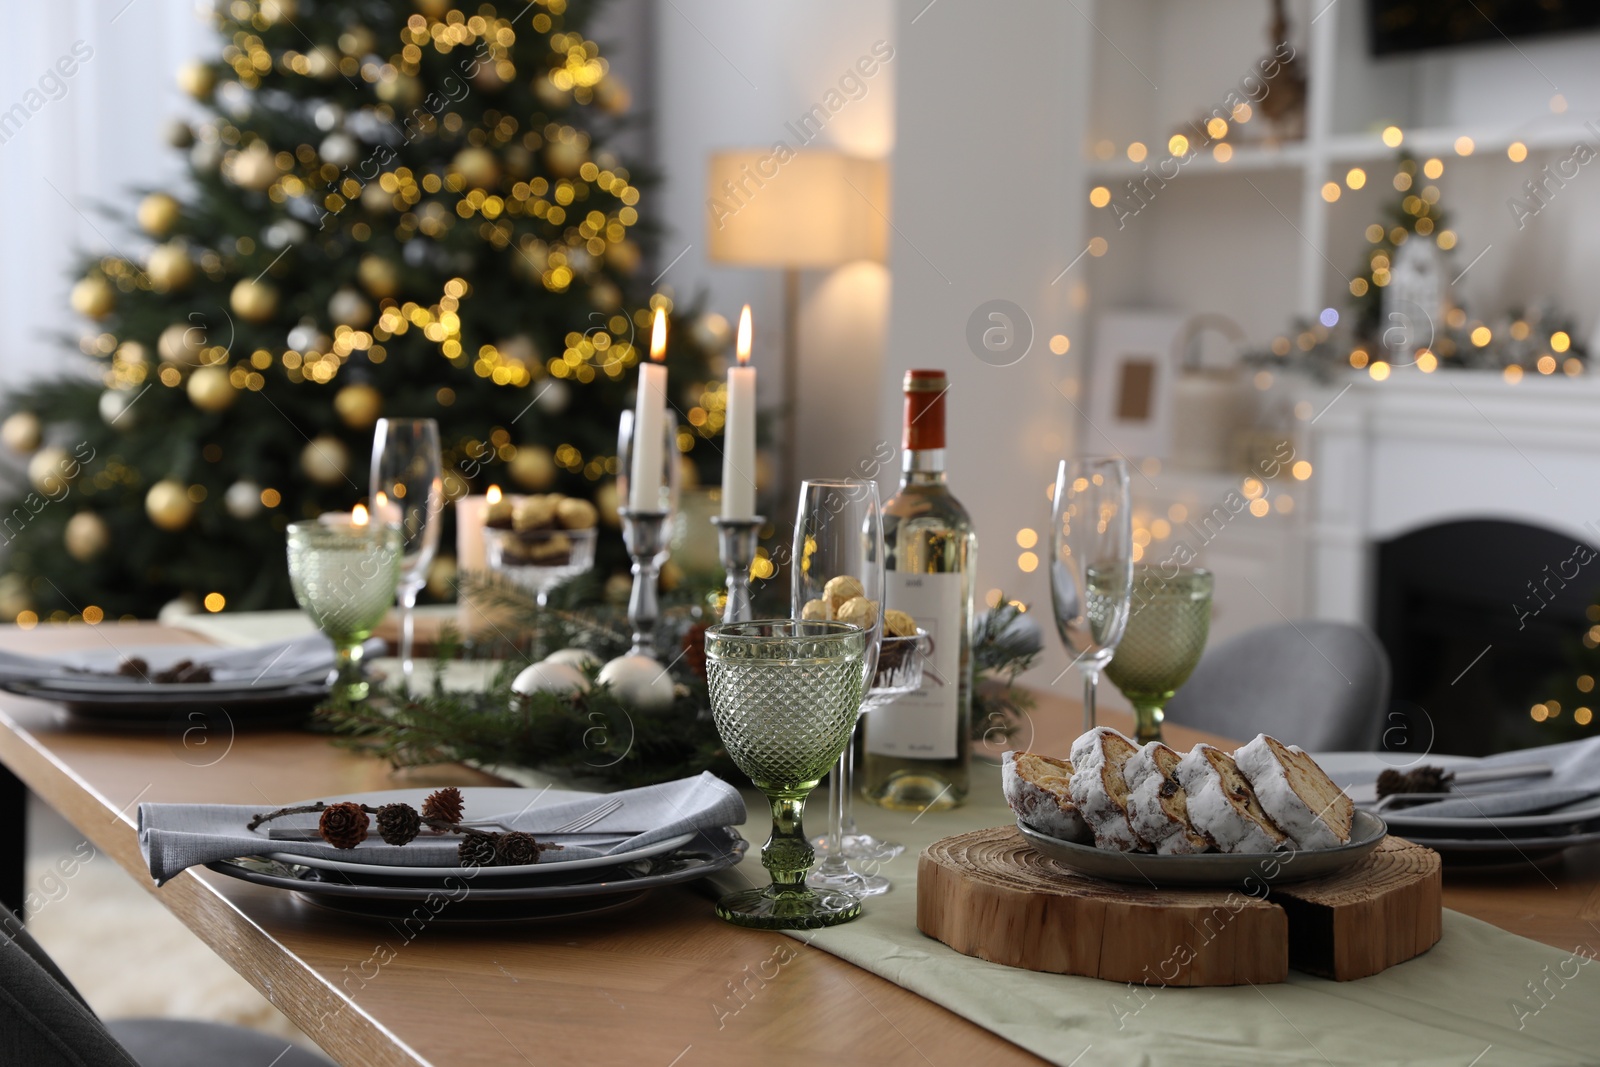 Photo of Christmas table setting with festive decor and dishware in living room